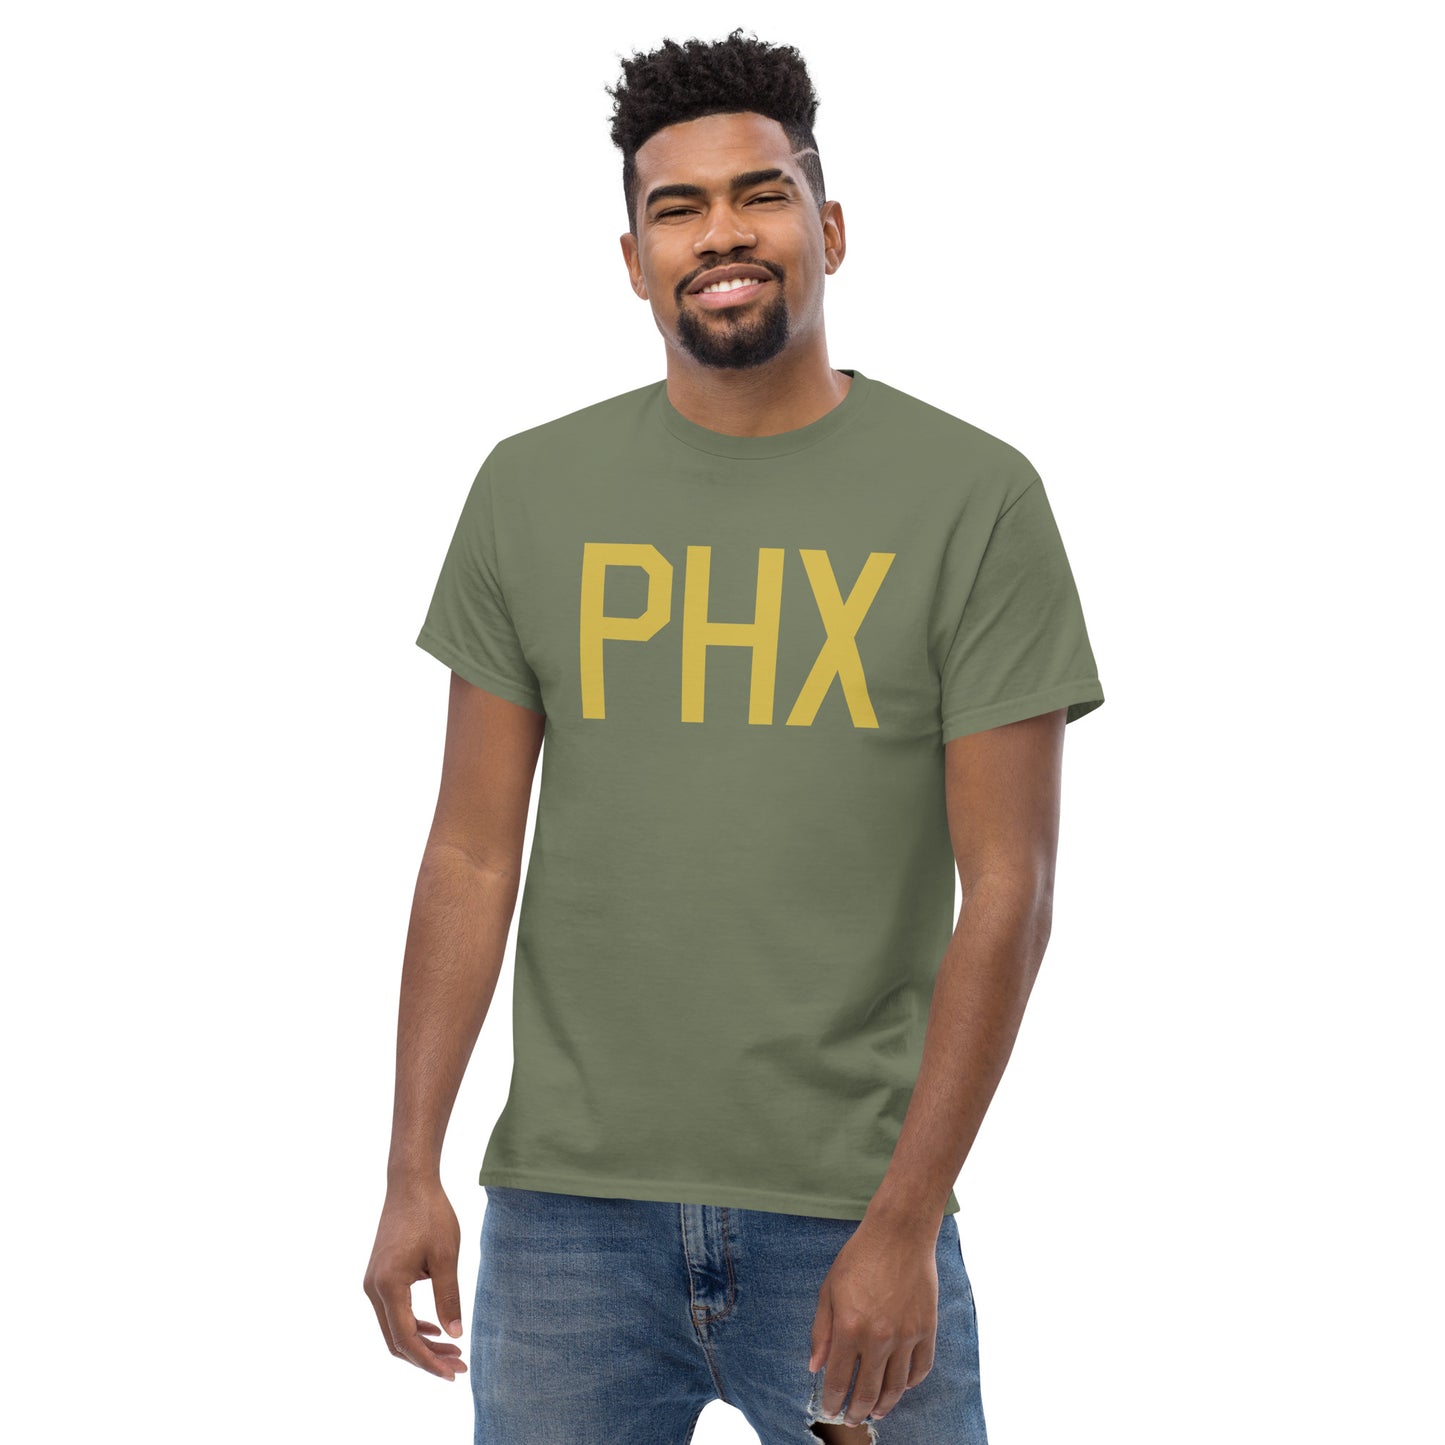 Aviation Enthusiast Men's Tee - Old Gold Graphic • PHX Phoenix • YHM Designs - Image 06